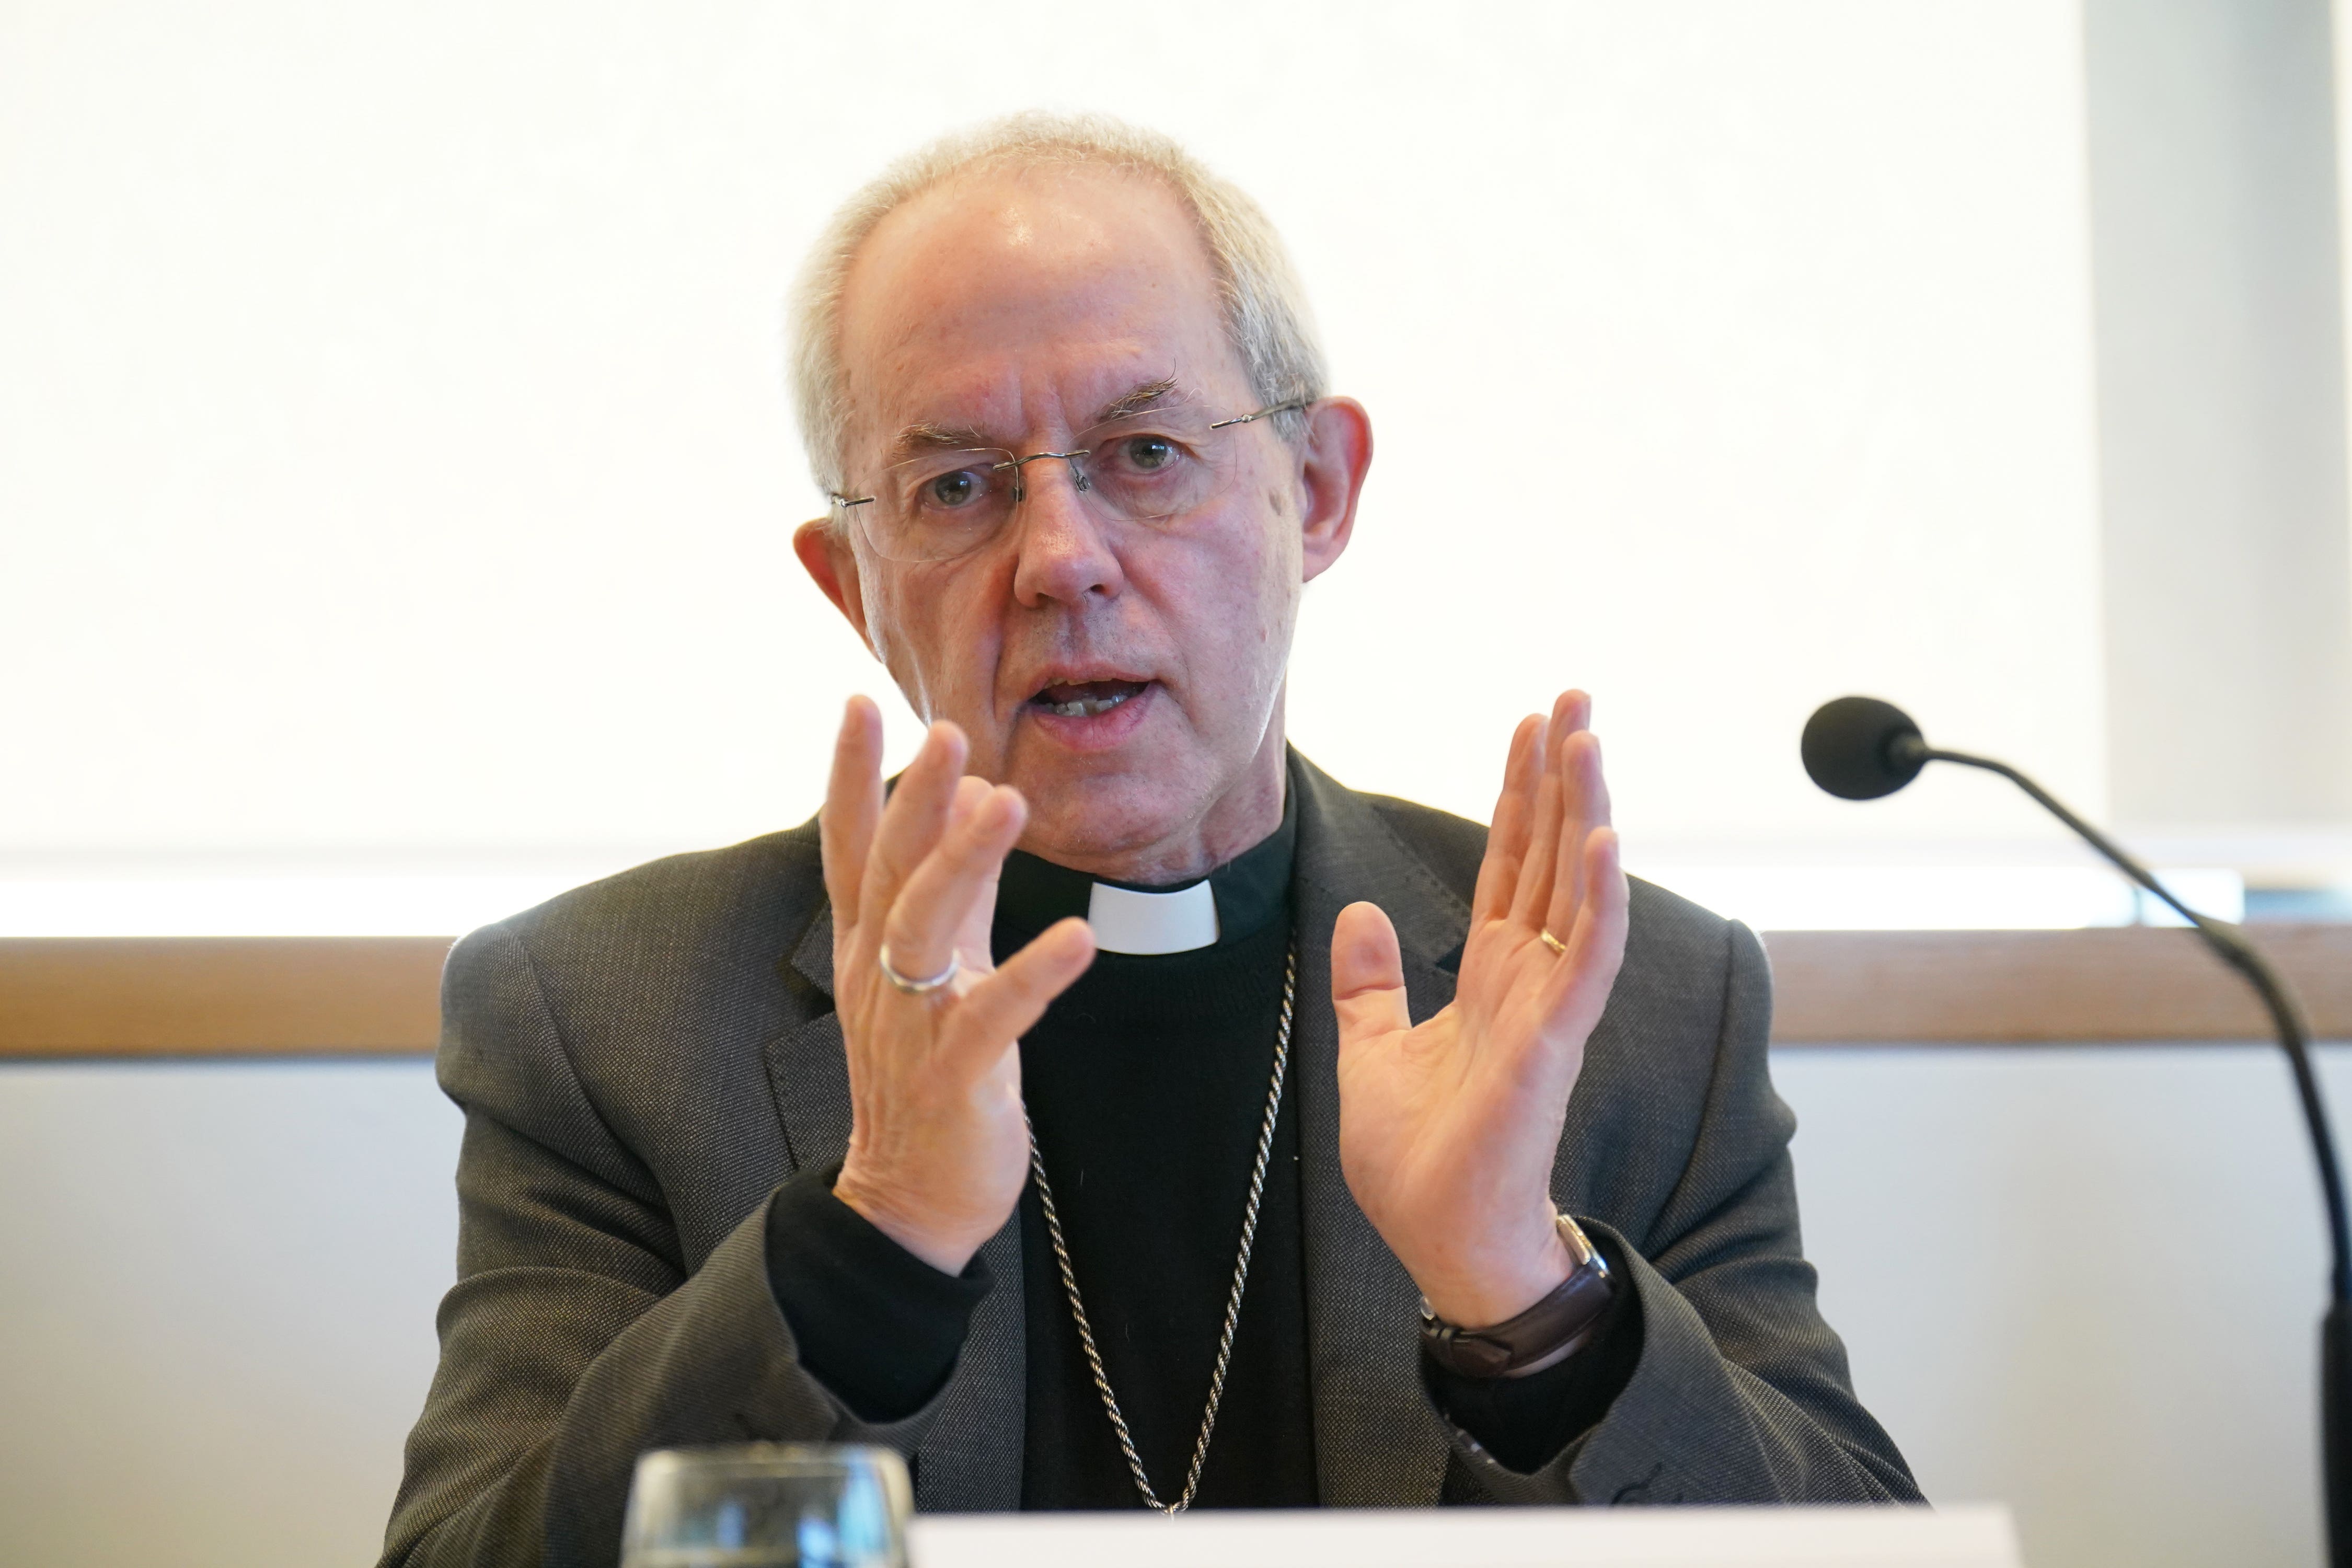 Justin Welby, the Archbishop of Canterbury, has admitted that the Church of England has been ‘deeply institutionally racist’